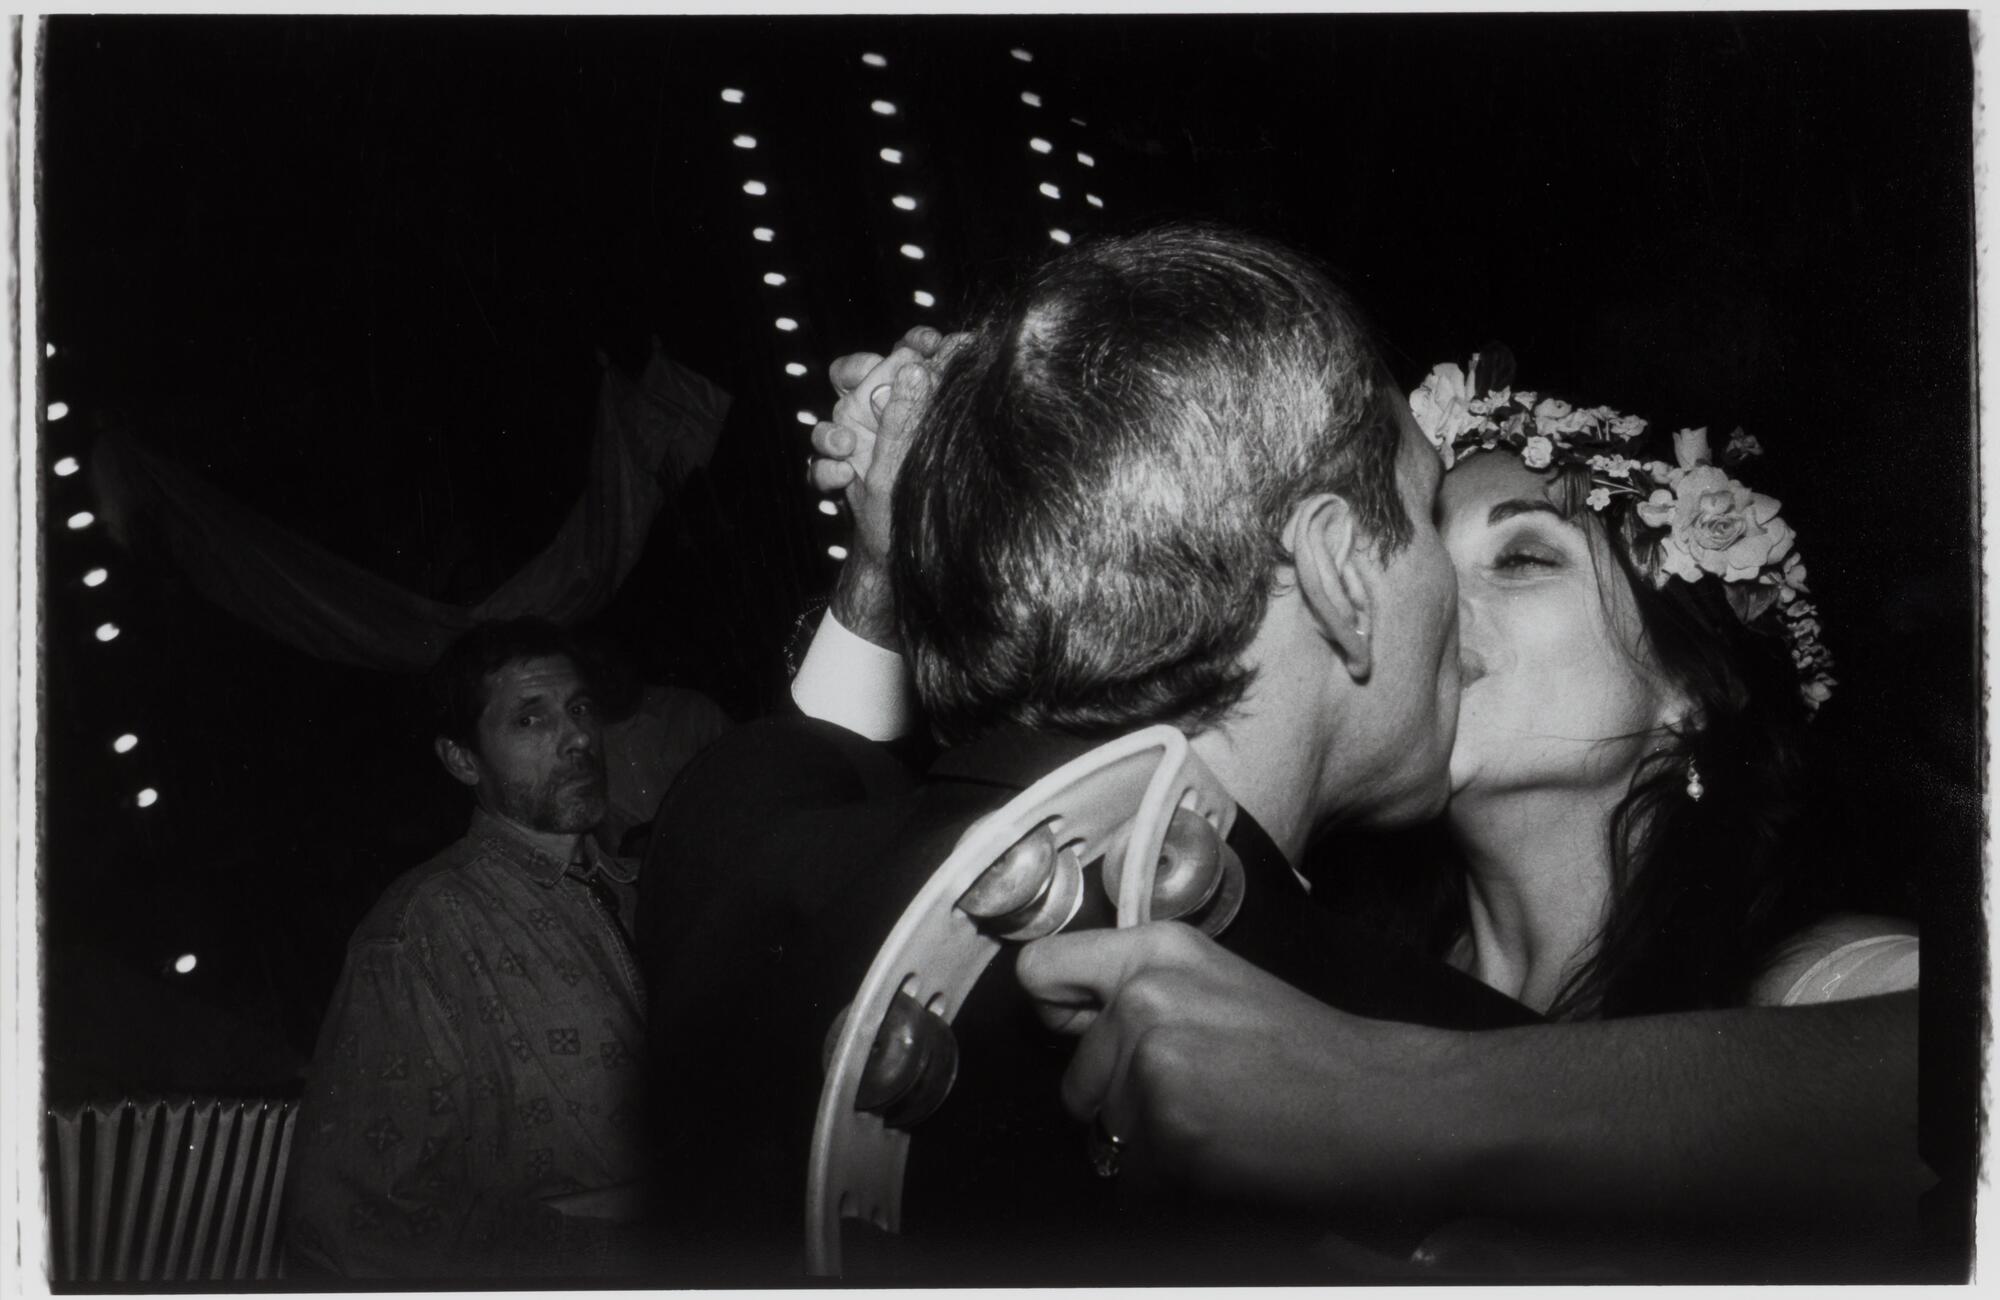 A photograph of a man and woman kissing; the man's head turned from the camera. The woman holds a tambourine in her hand and wears a flower crown. In the background, a man looks toward the camera.